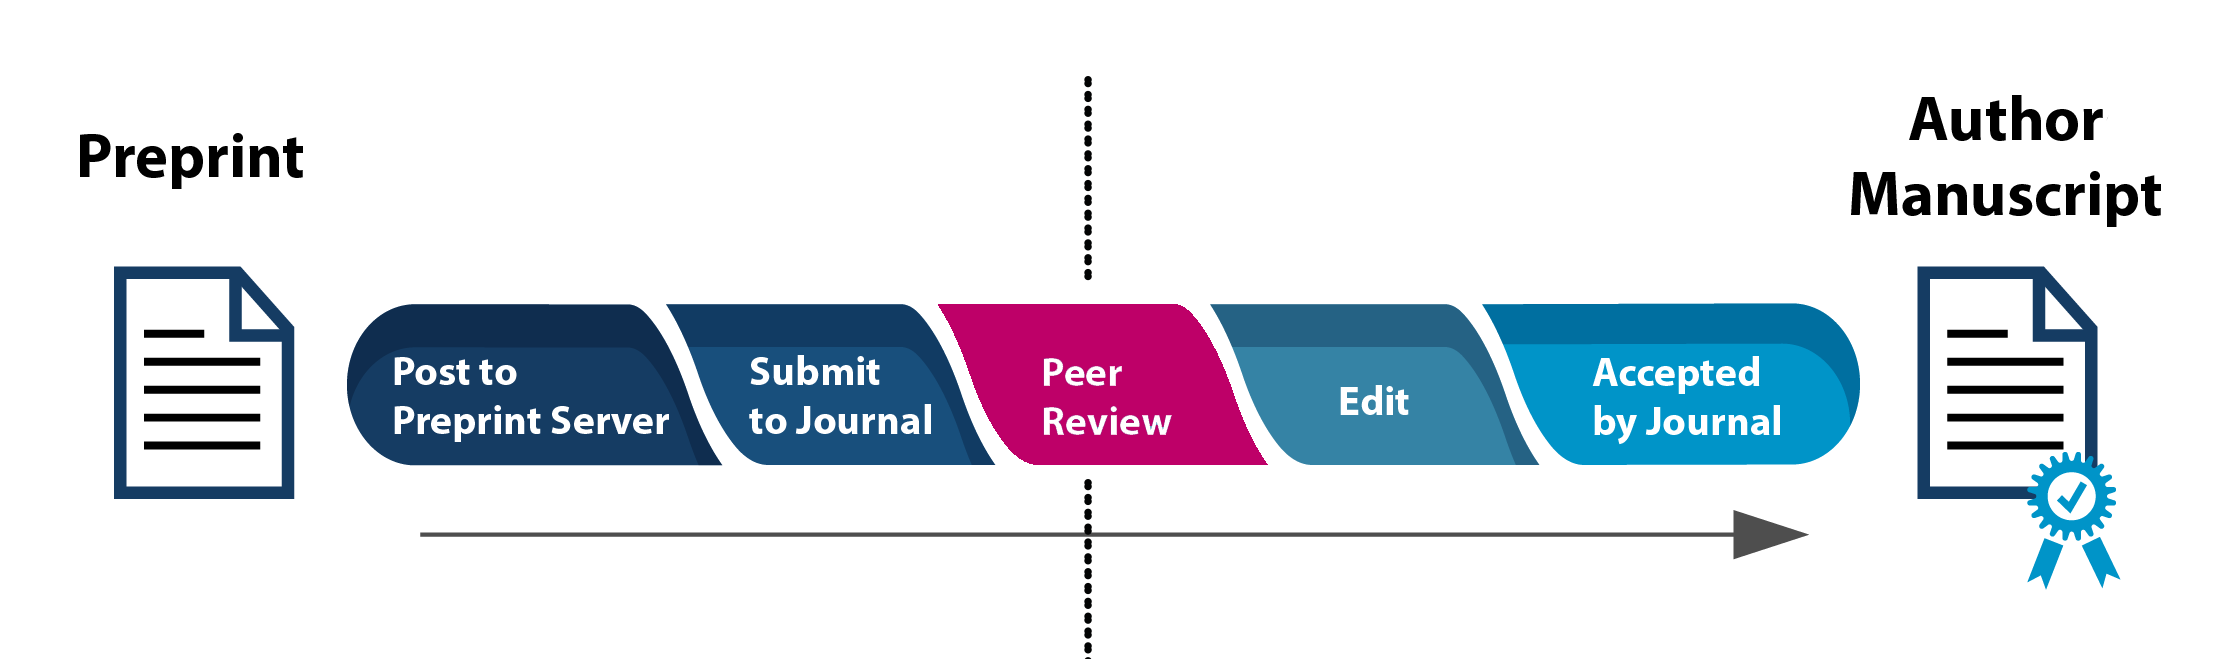 Stages of printing showing preprint to Author Manuscript with Peer Review emphasized